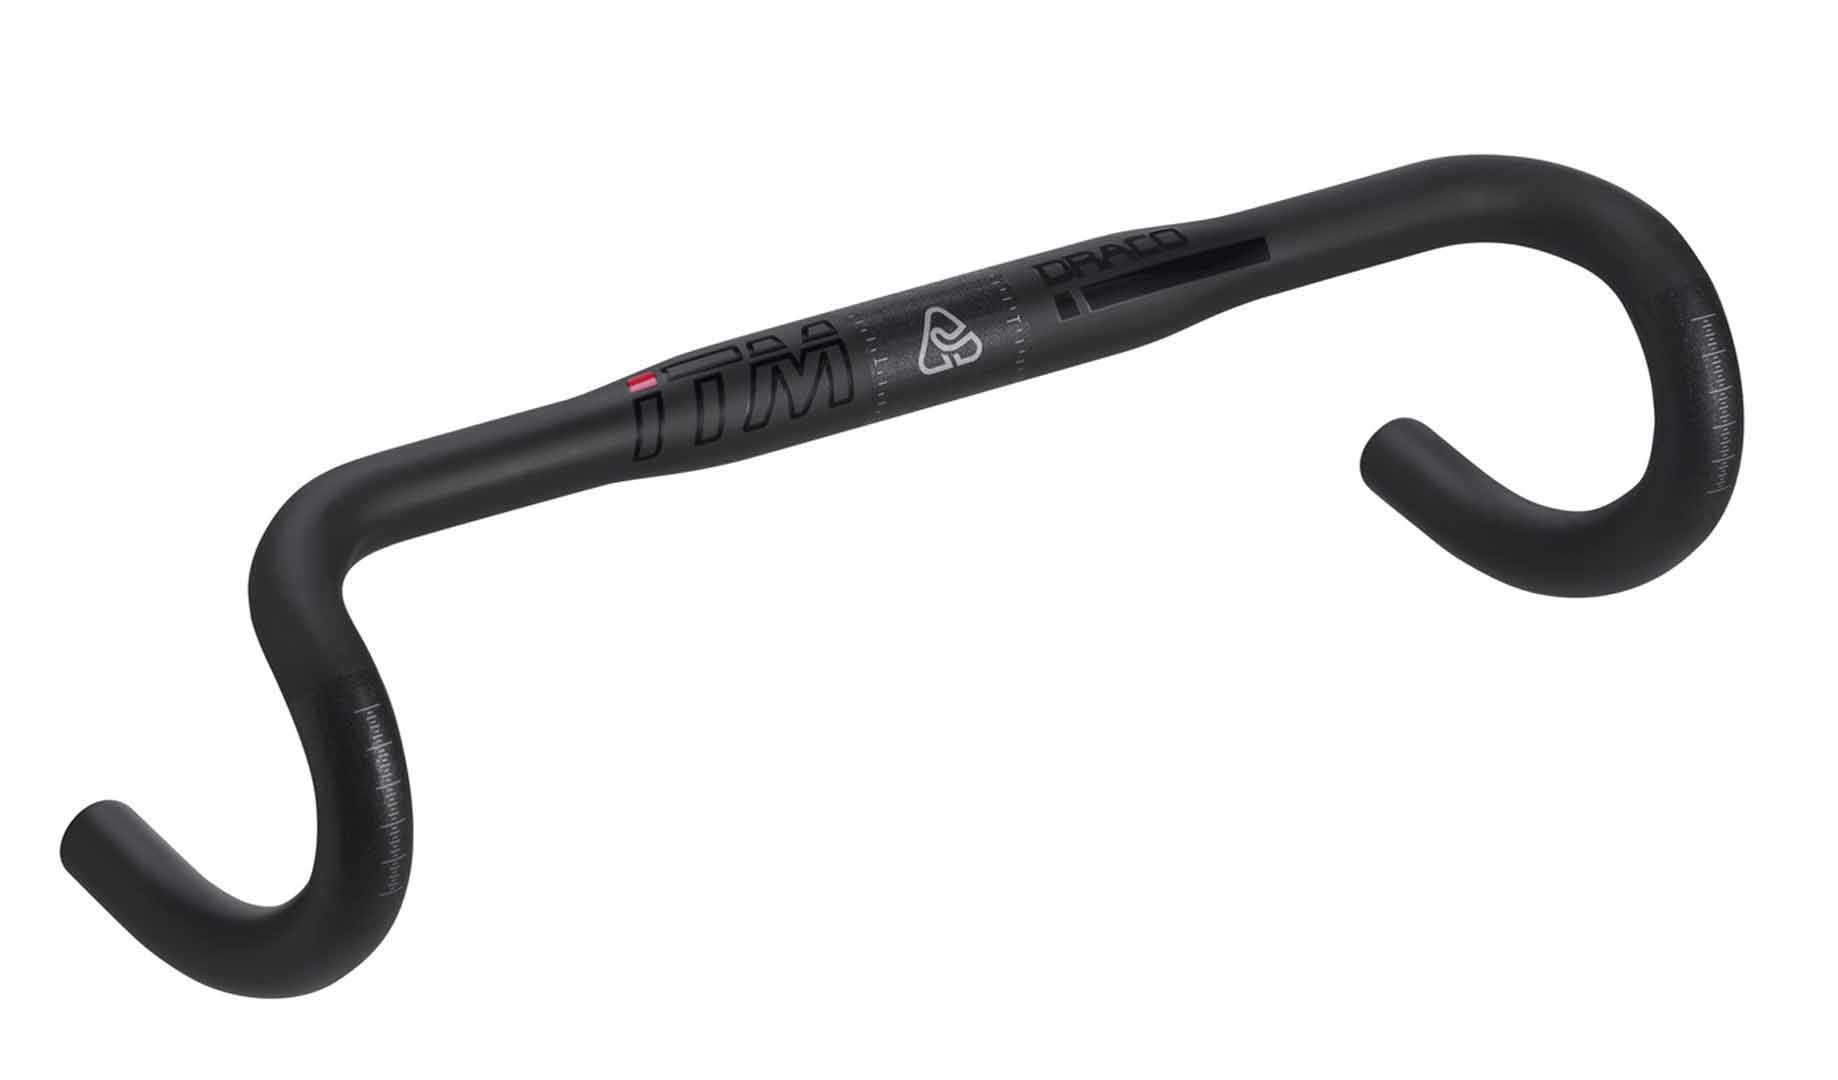 ITM Triango Carbon Wrapped Classic Bend Handlebar 